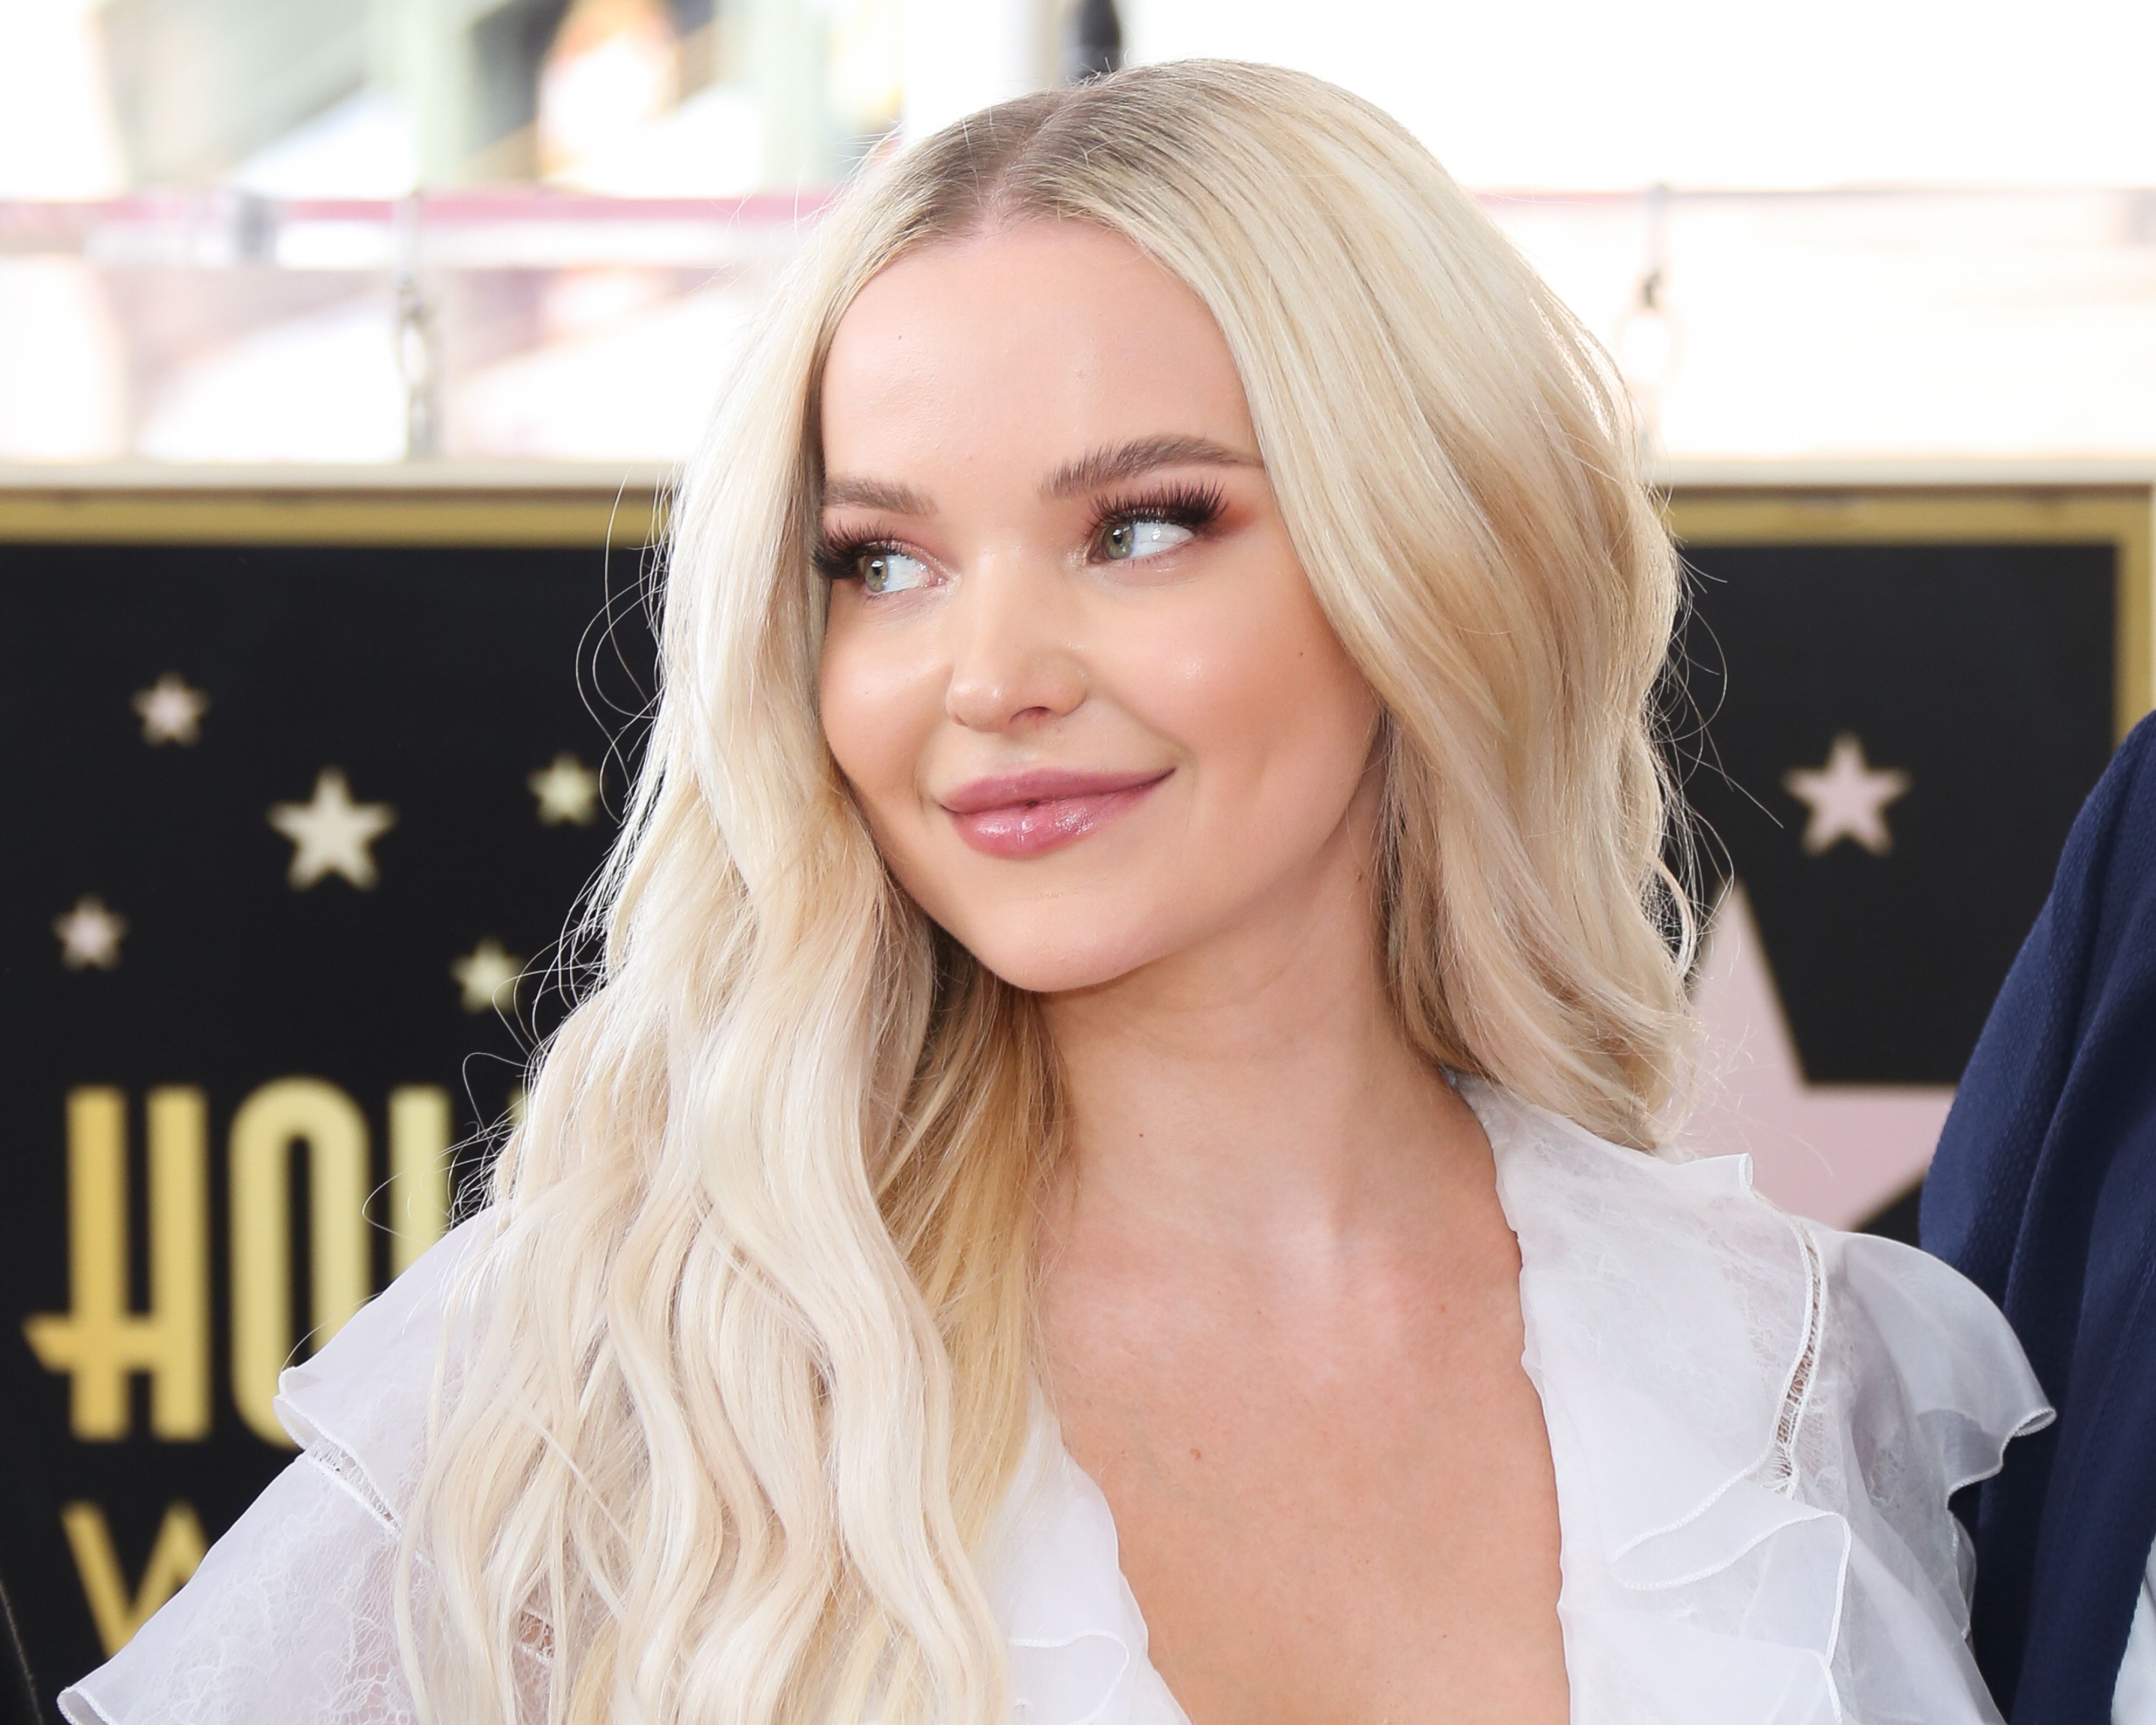 Dove Cameron Just Dyed Her Hair Purple for 2019